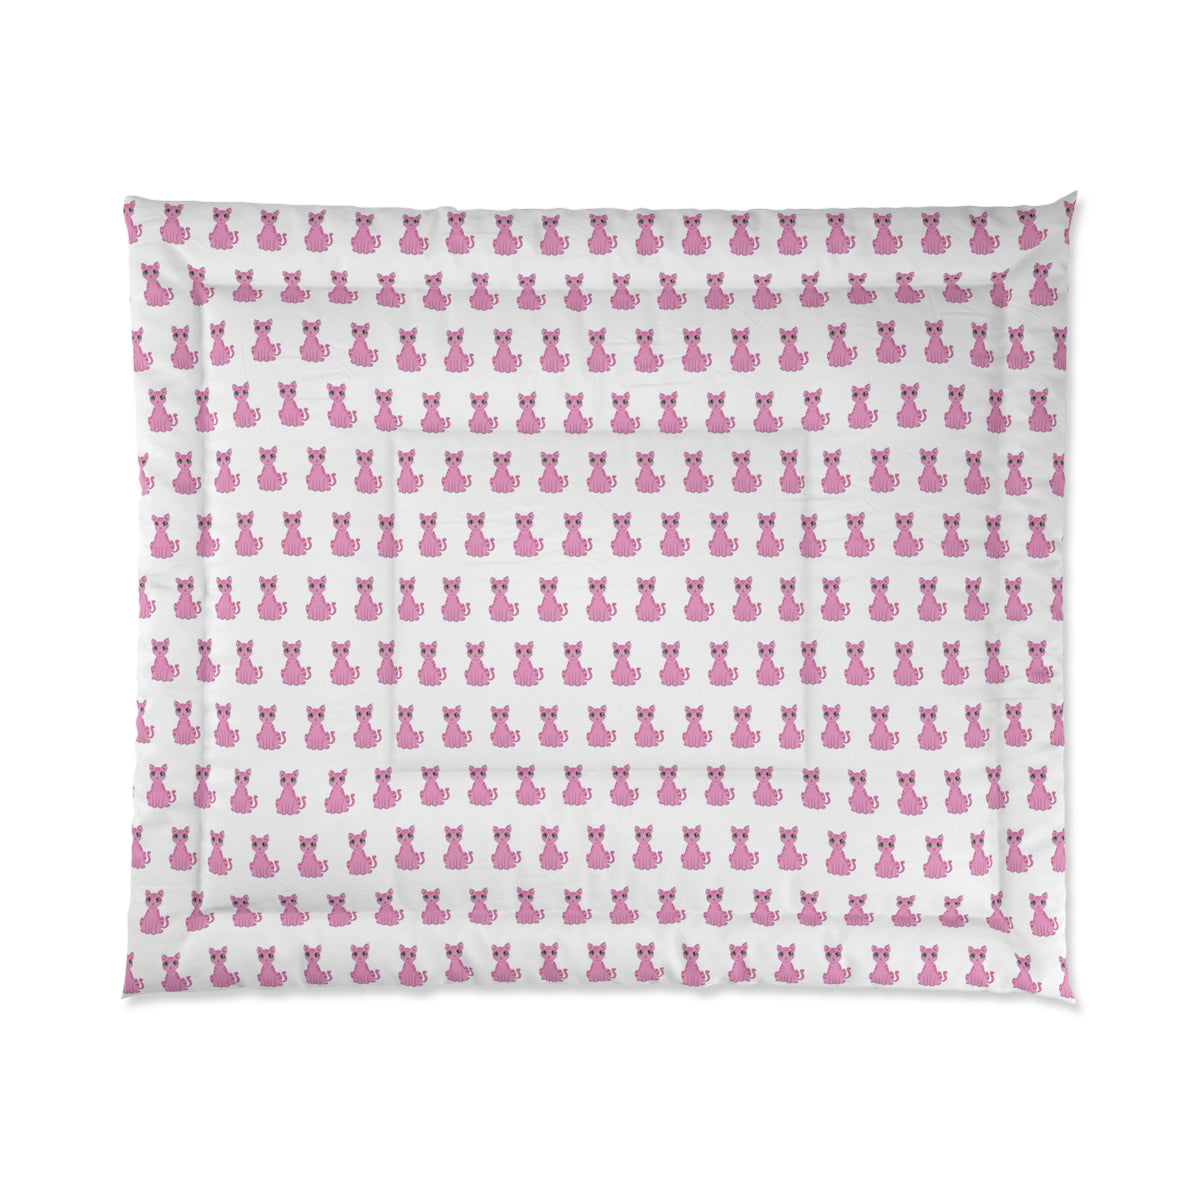 Unique Pink Cat with Green Eyes Pattern Comforter - Lightweight Polyester Bedding